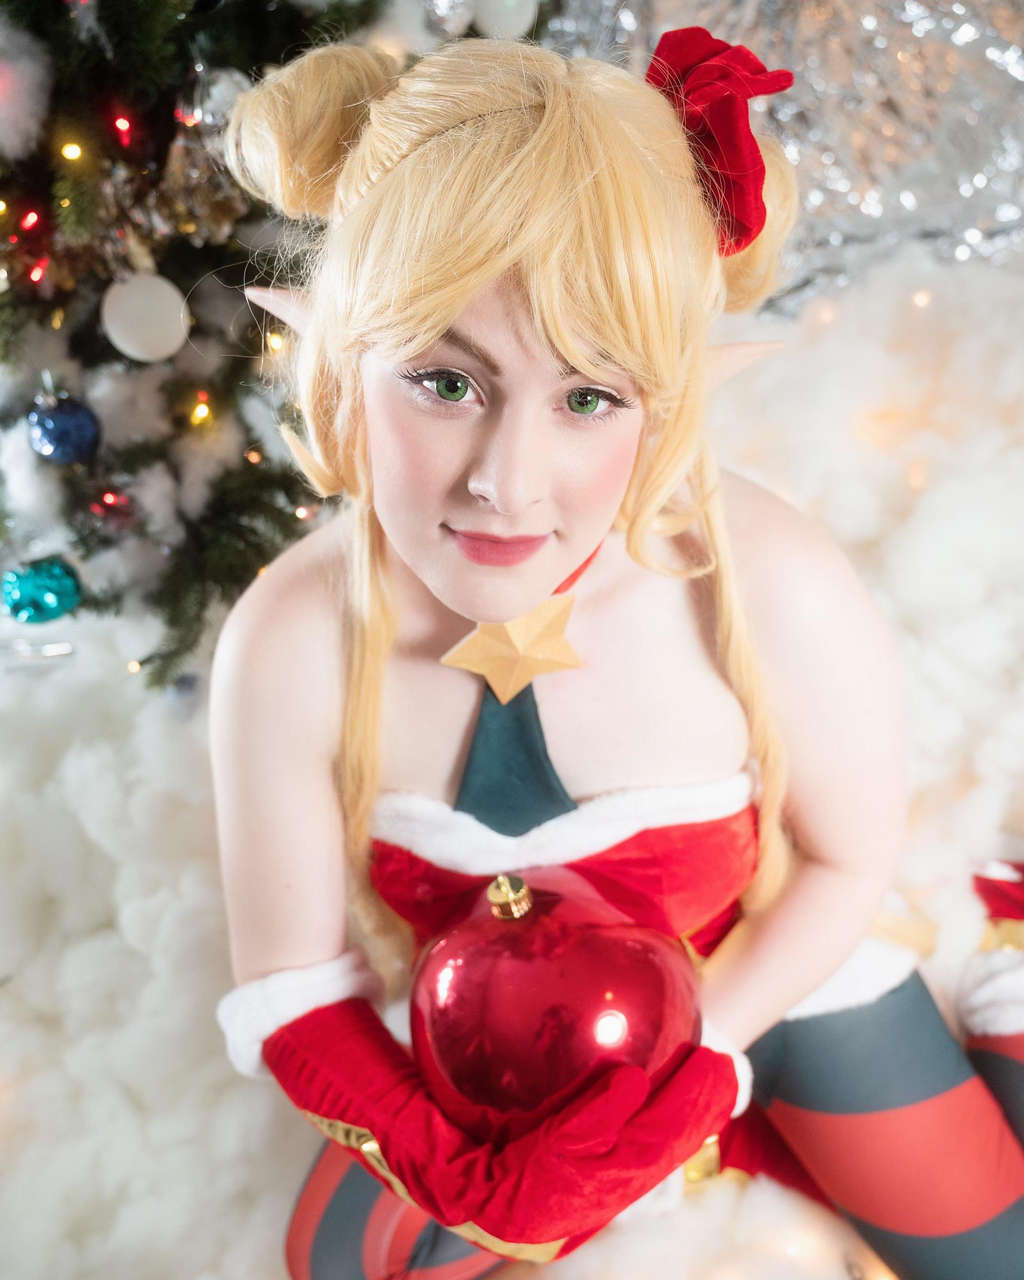 Merry Christmas Ambitious Elf Jinx By Saltedca